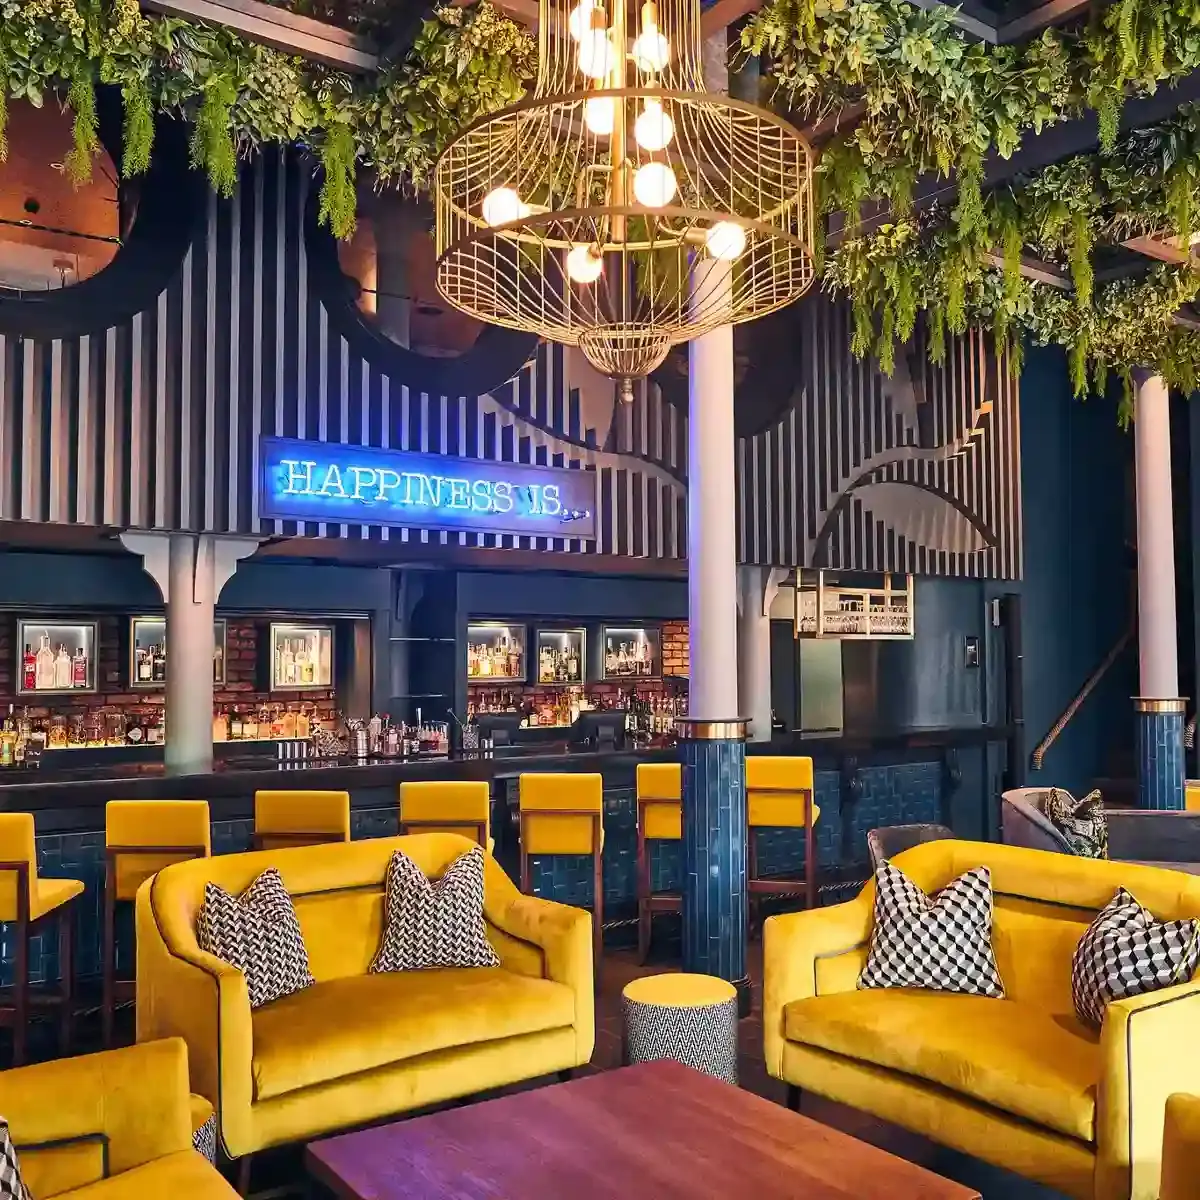 Yellow fabric sofas and bar stools prominently feature around a wooden table, with the bar in the background and a blue neon sign reading "happiness is" is displayed above the bar.